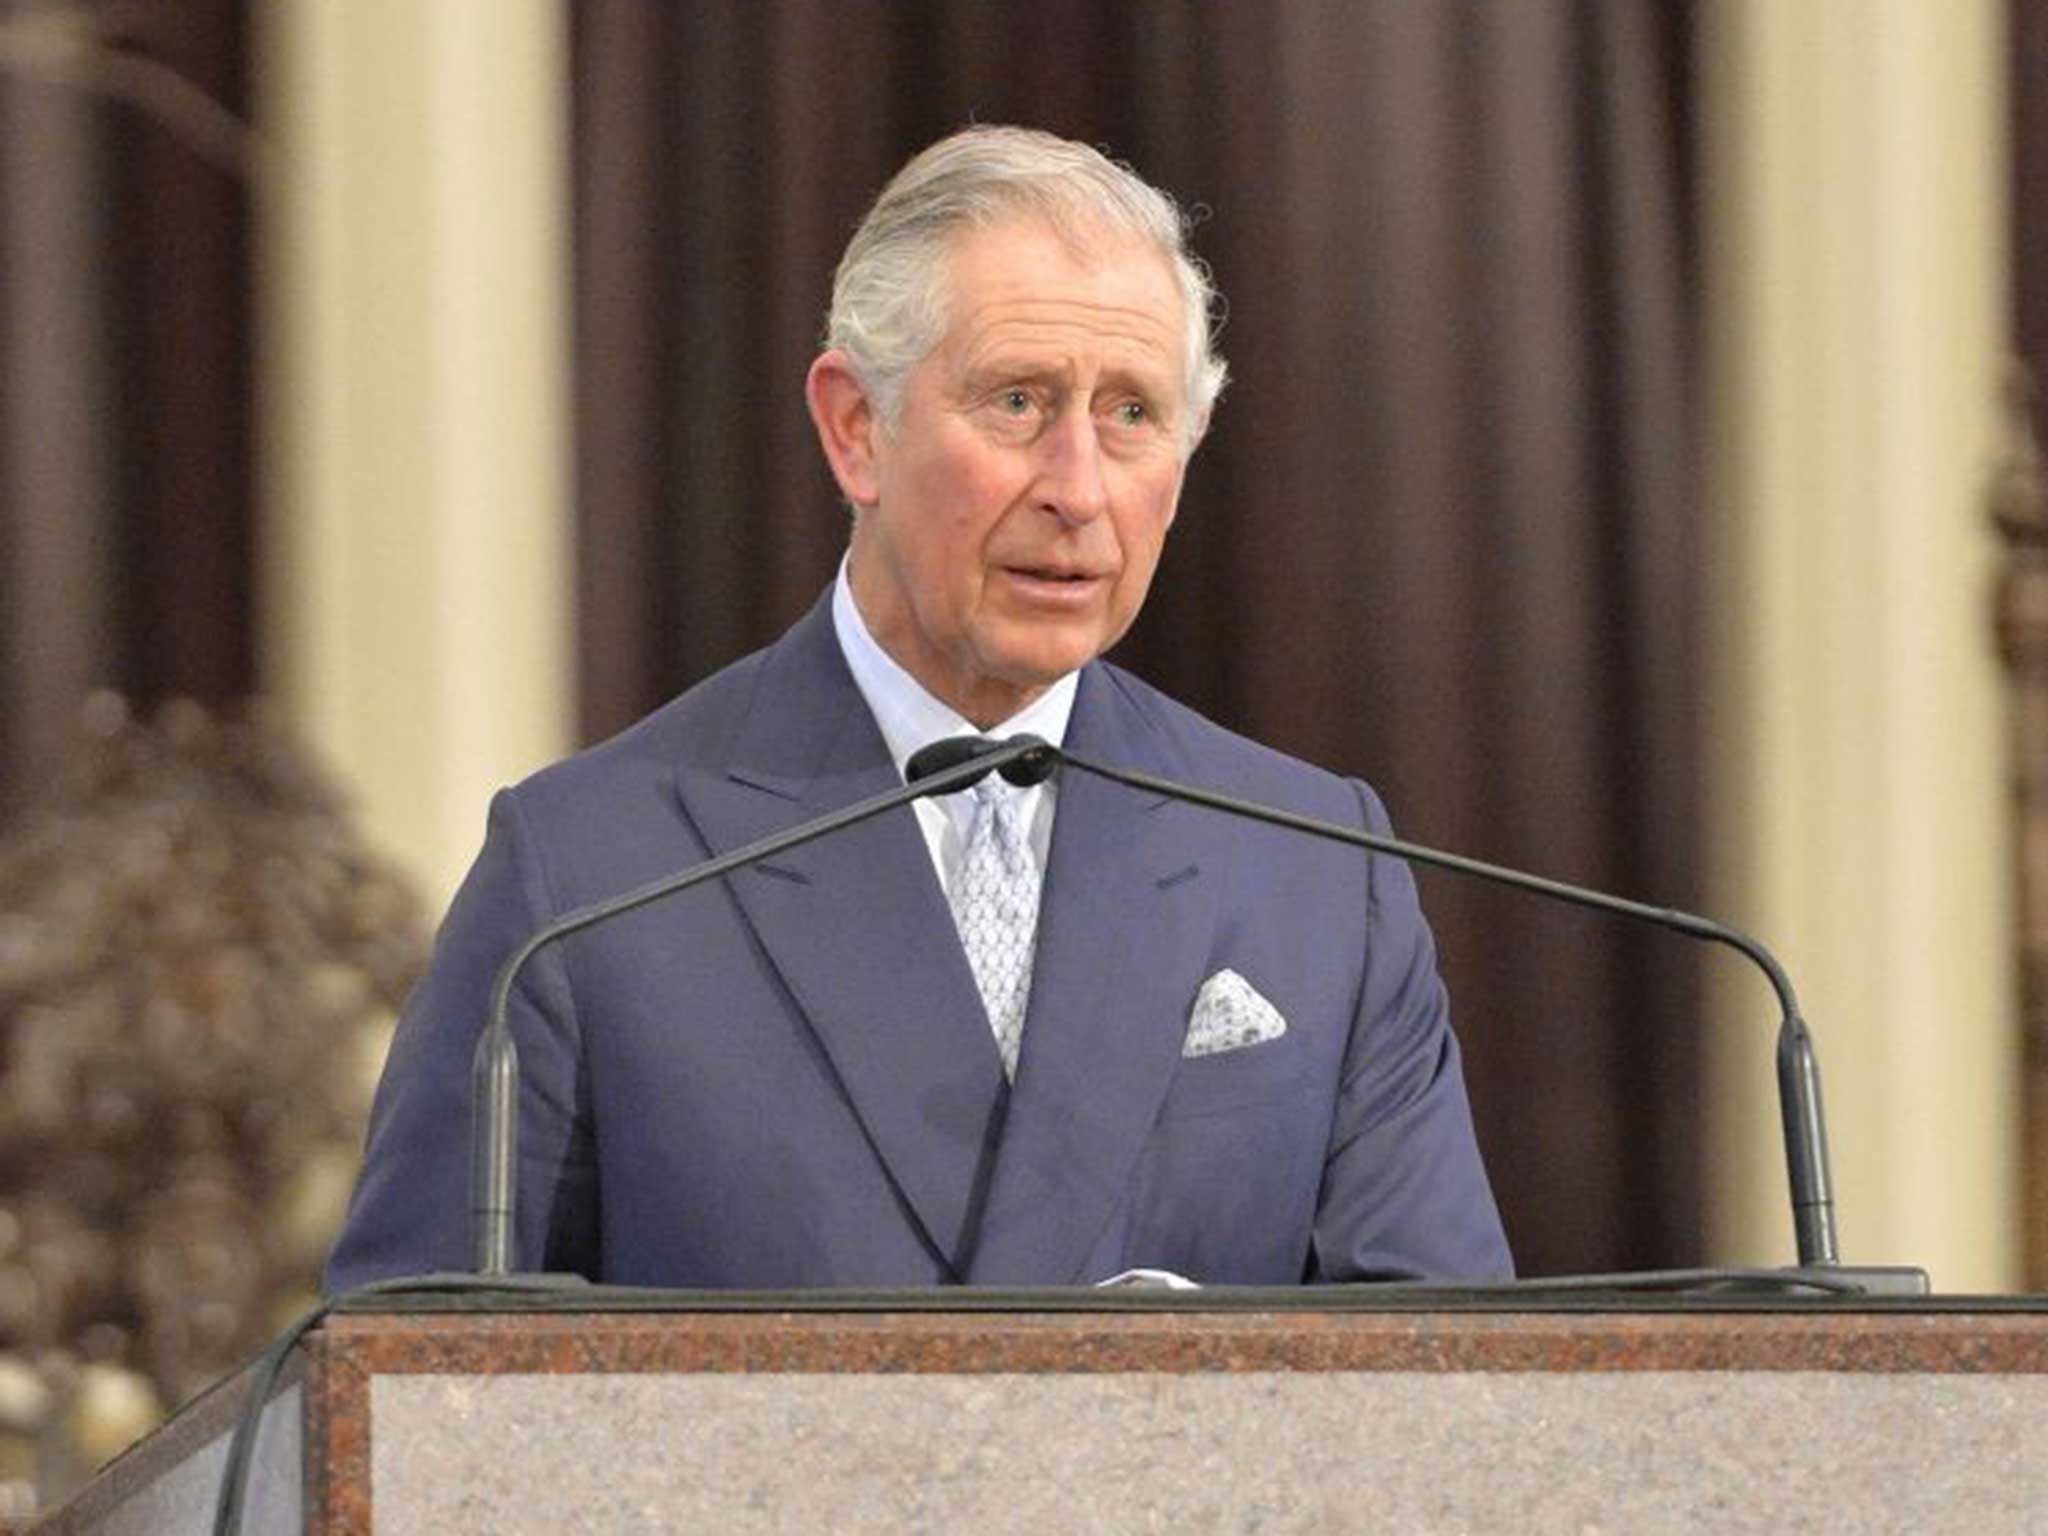 Prince Charles delivers his speech at Cathedral of the Assumption in Louisville, Kentucky